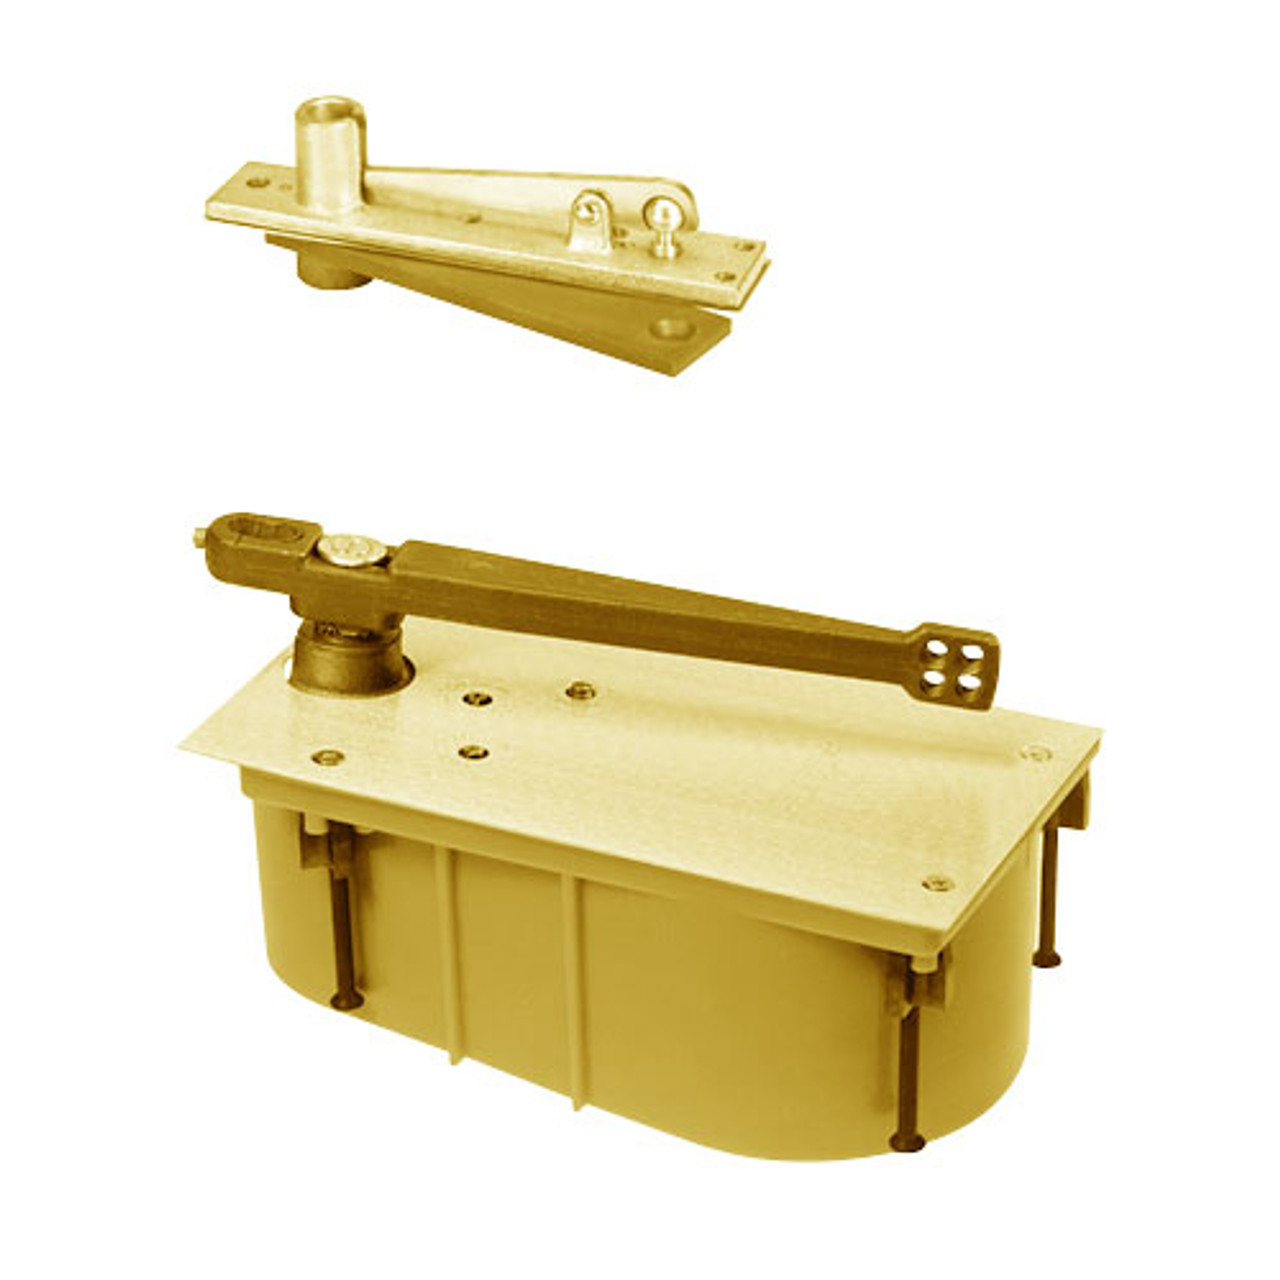 PH28-105N-CWF-LH-605 Rixson 28 Series Heavy Duty Single Acting Center Hung Floor Closer in Bright Brass Finish